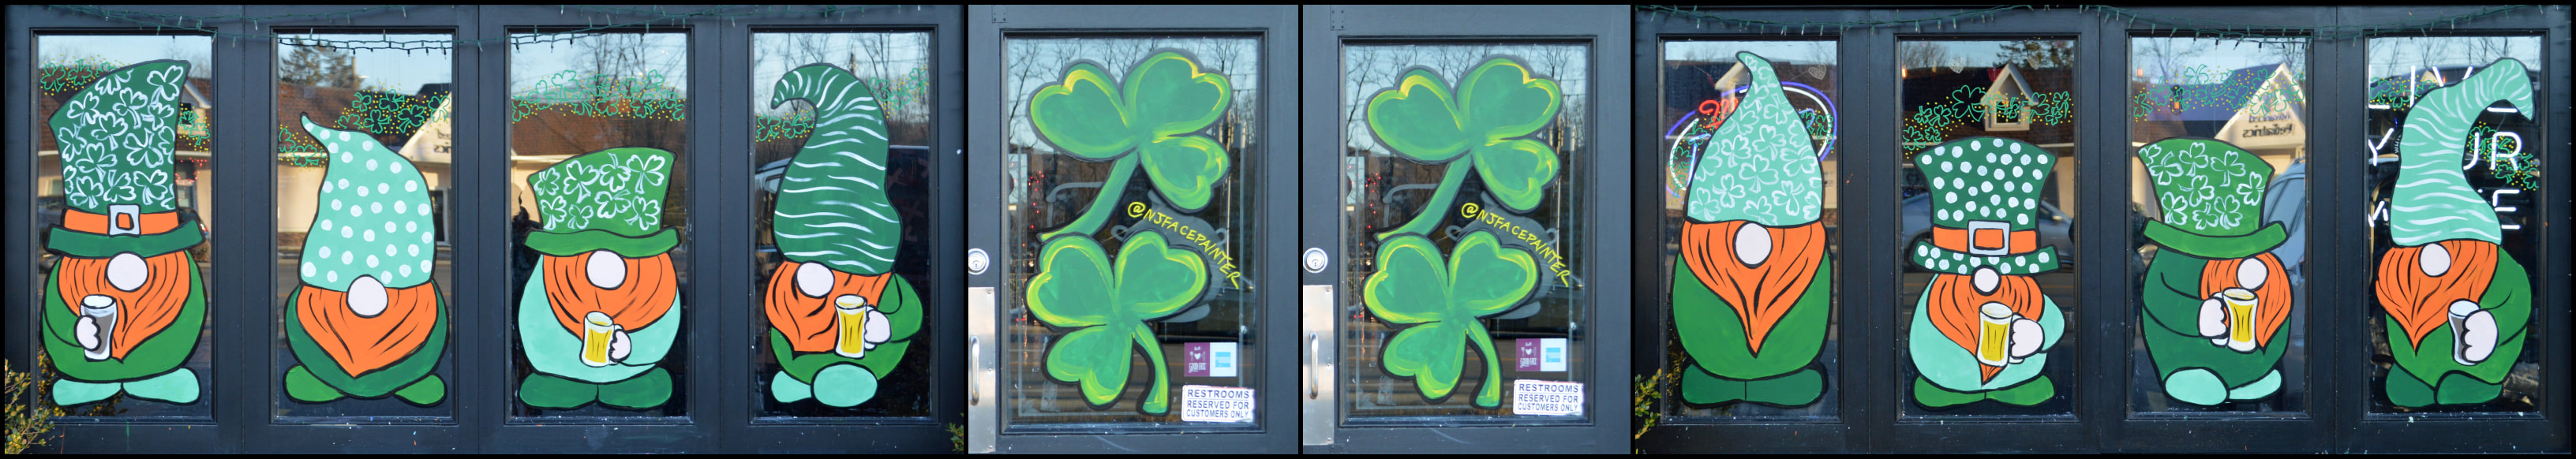 St. Patrick's Day Windows at The Copper Still in Pomona, Rockland County, NY featuring gnome style leprechauns